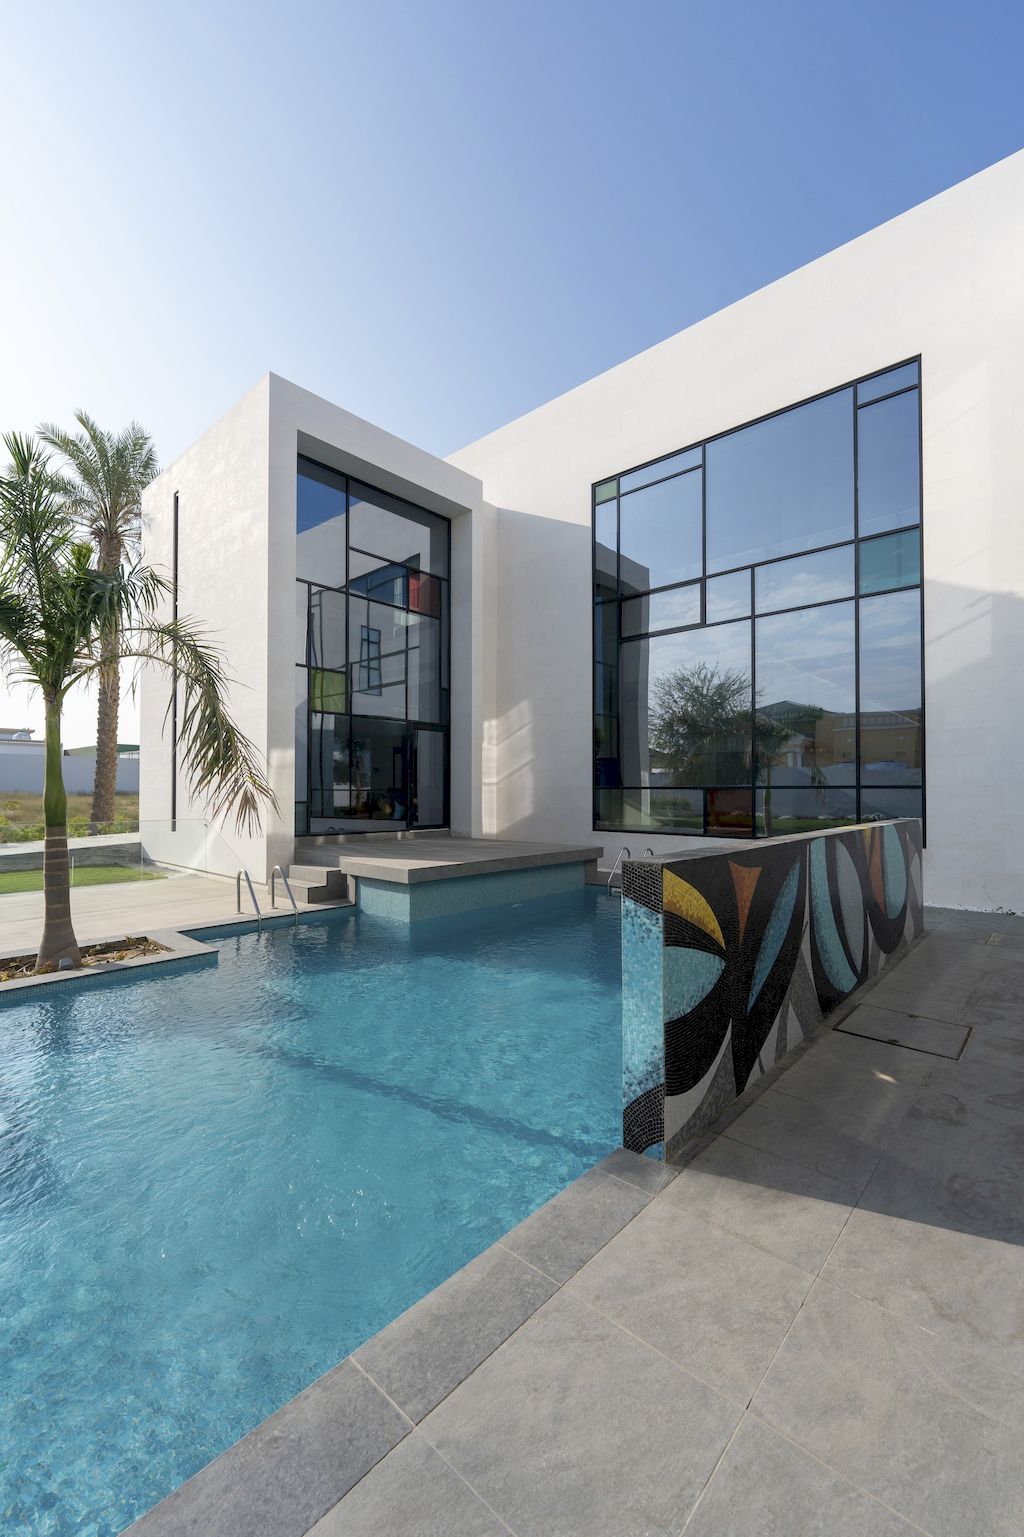 Villa Diwani, an Exquisite home by Shape Architecture Practice + Research